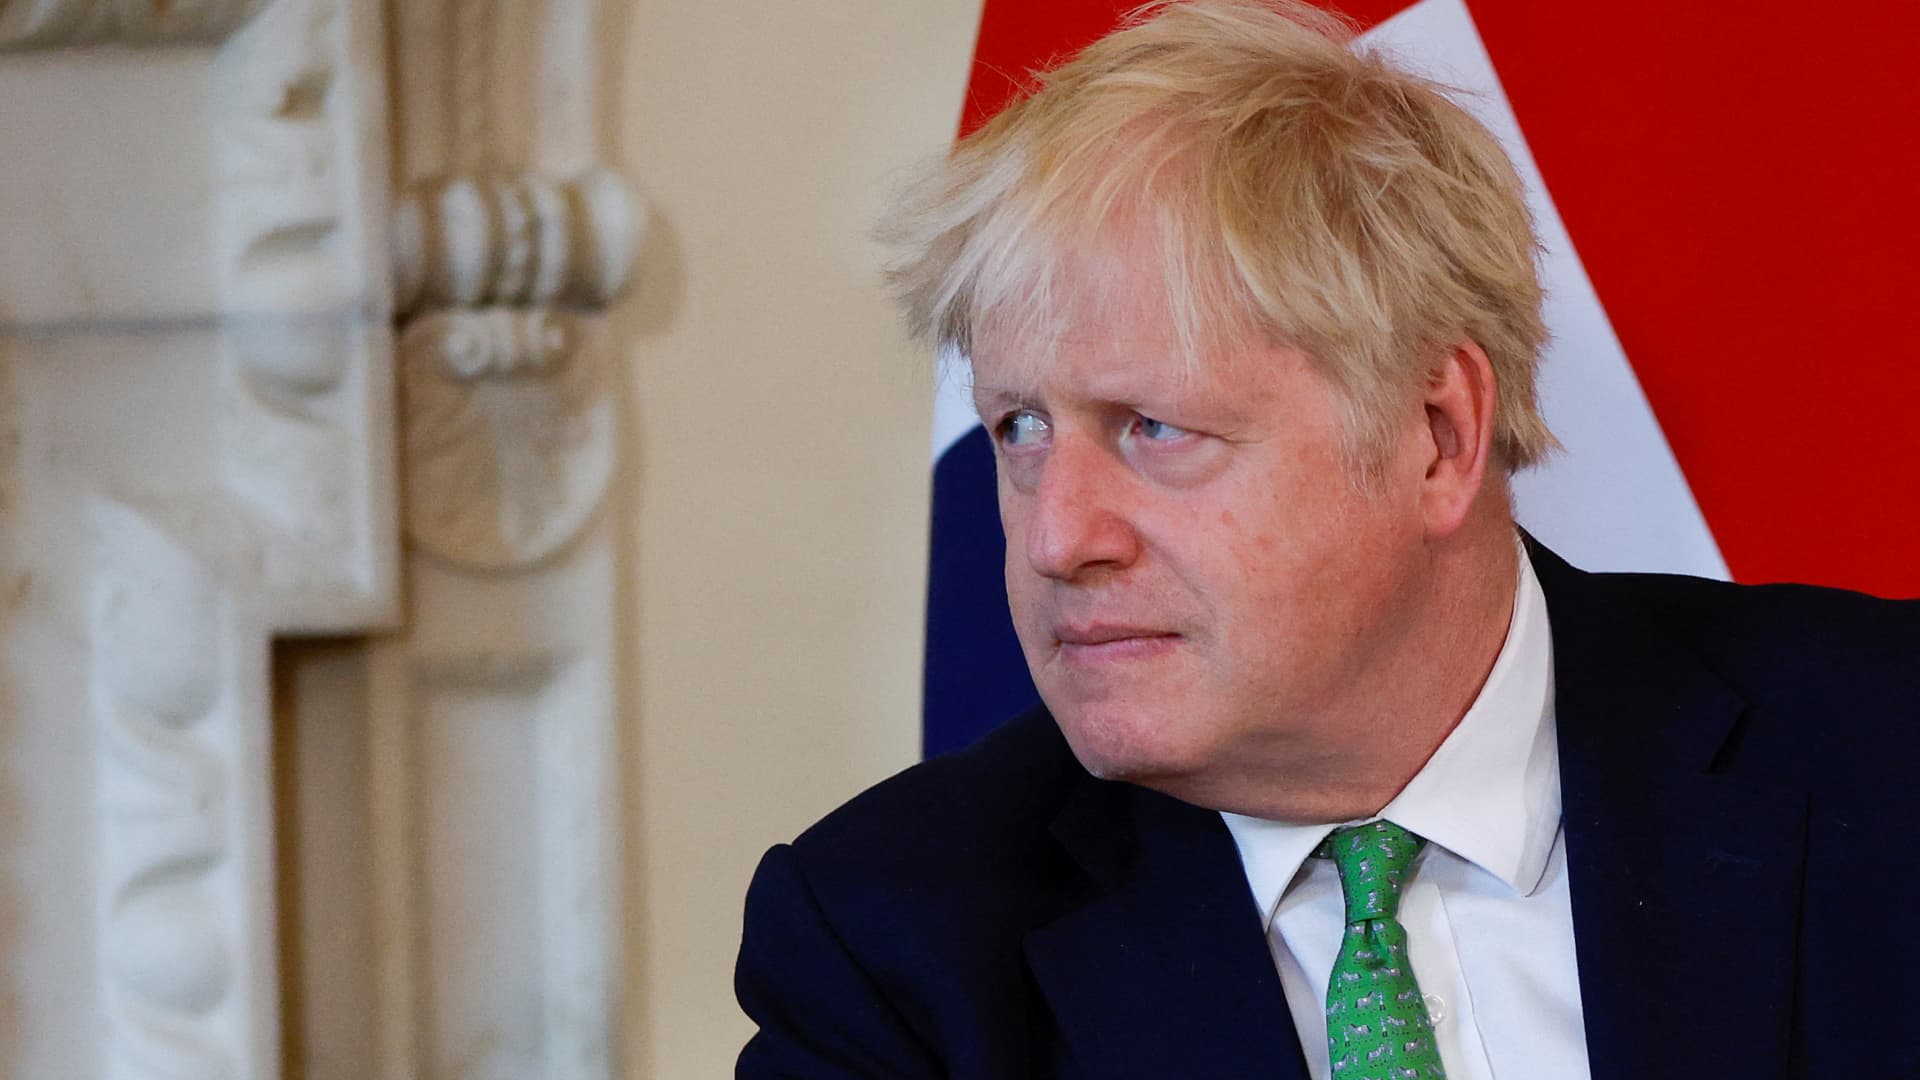 Boris Johnson's leadership hangs by a thread after top resignations